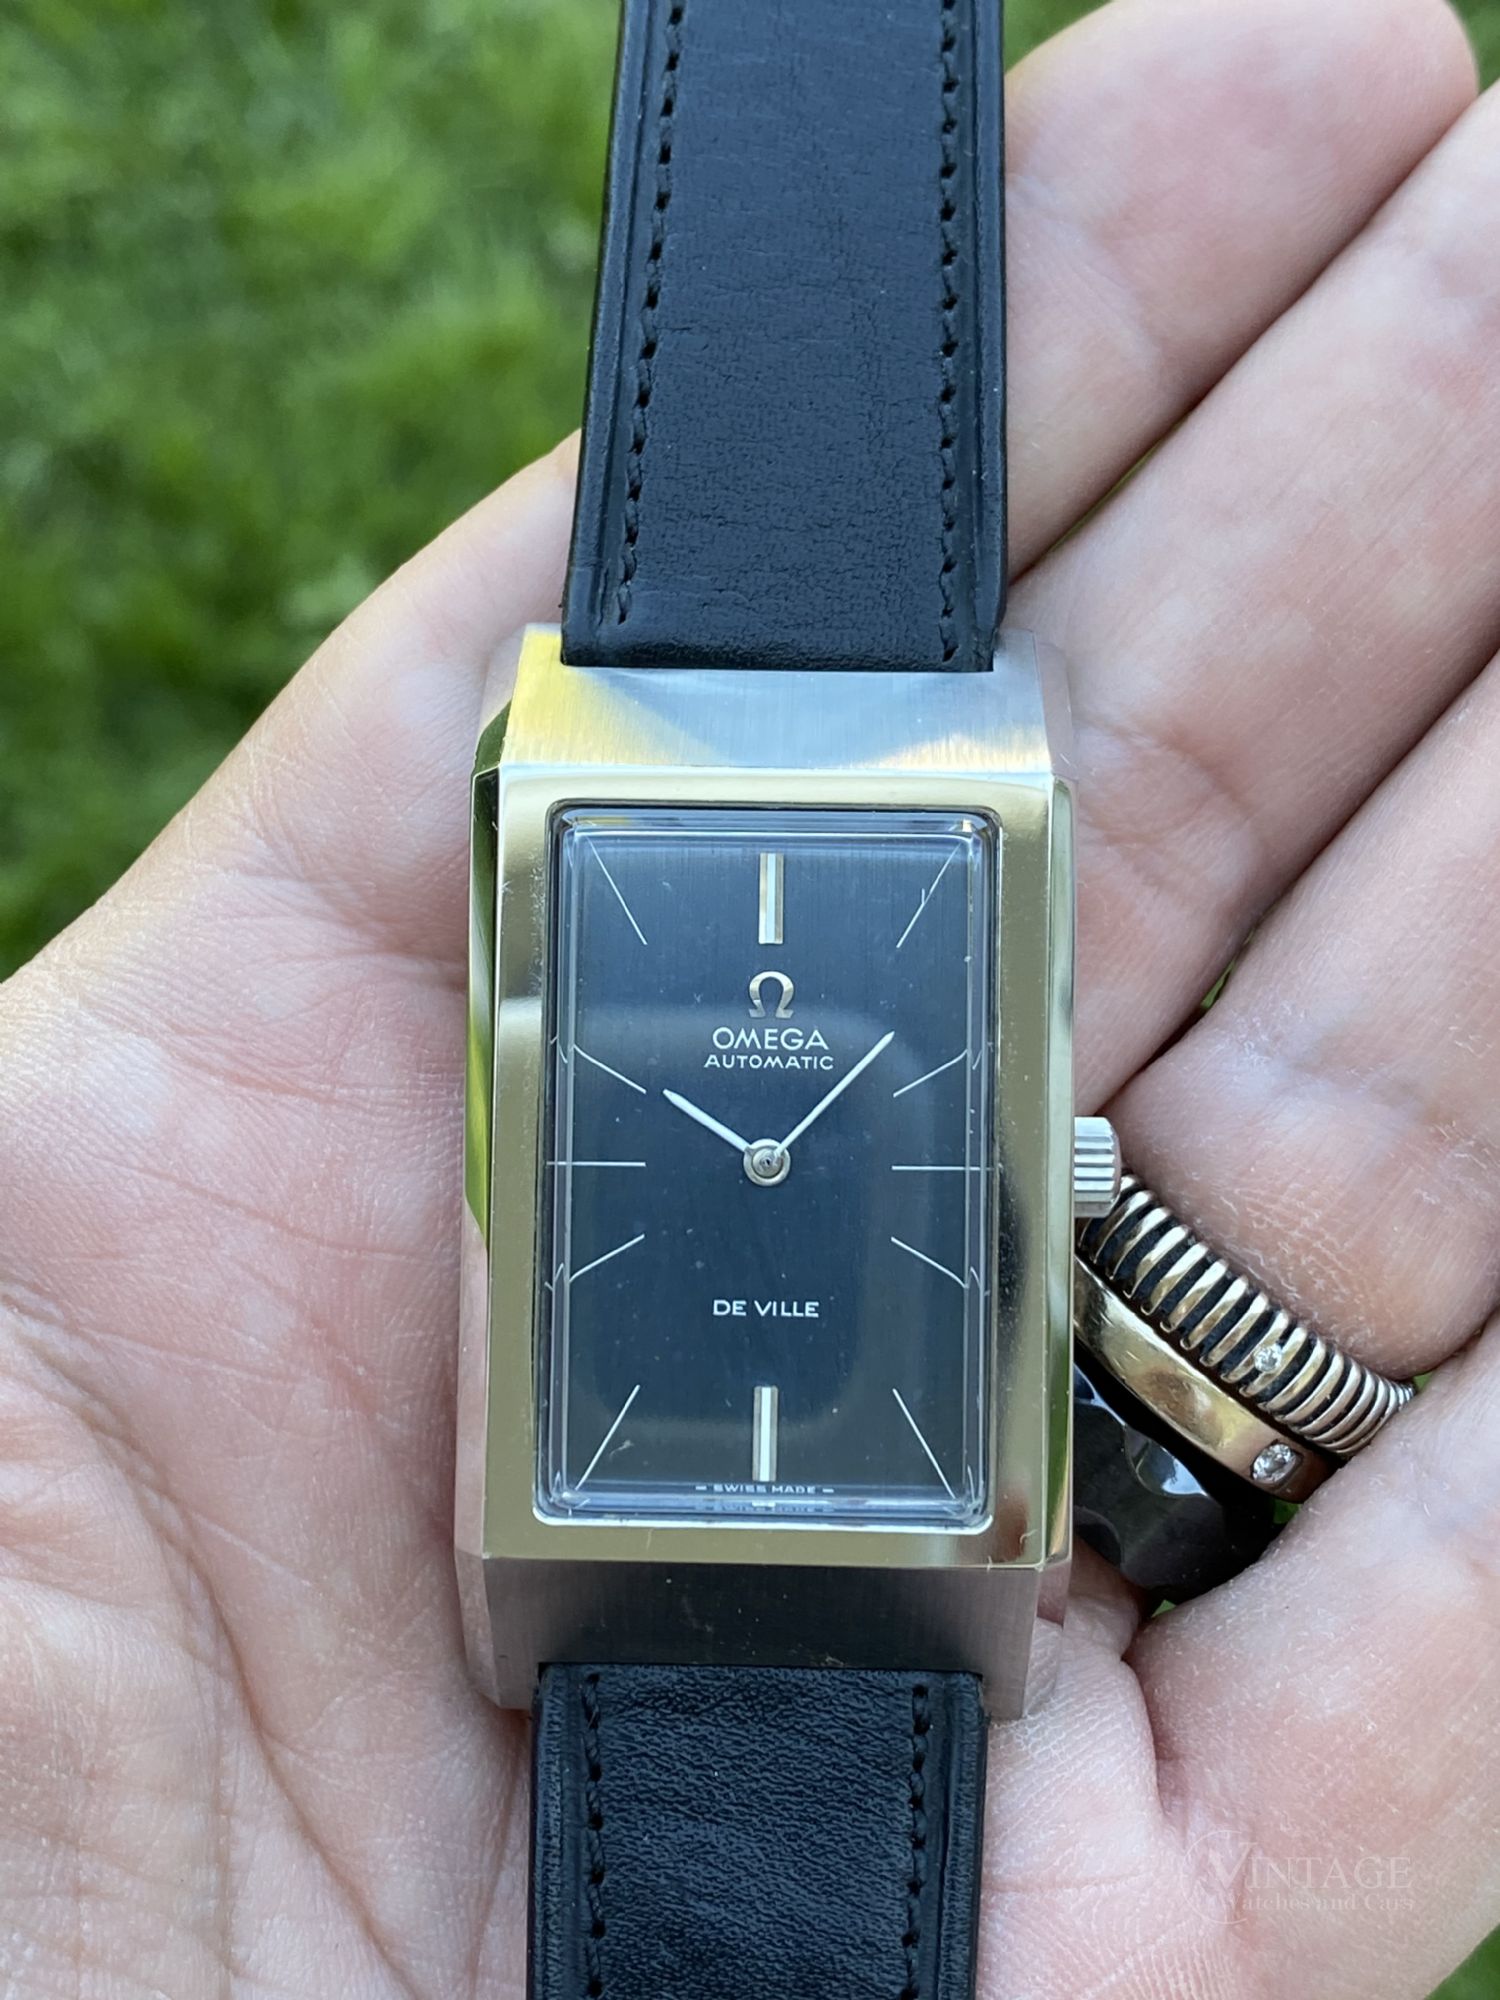 Vintage Watches & Cars - Watches | Omega - 1970s Big Tank De Ville ...